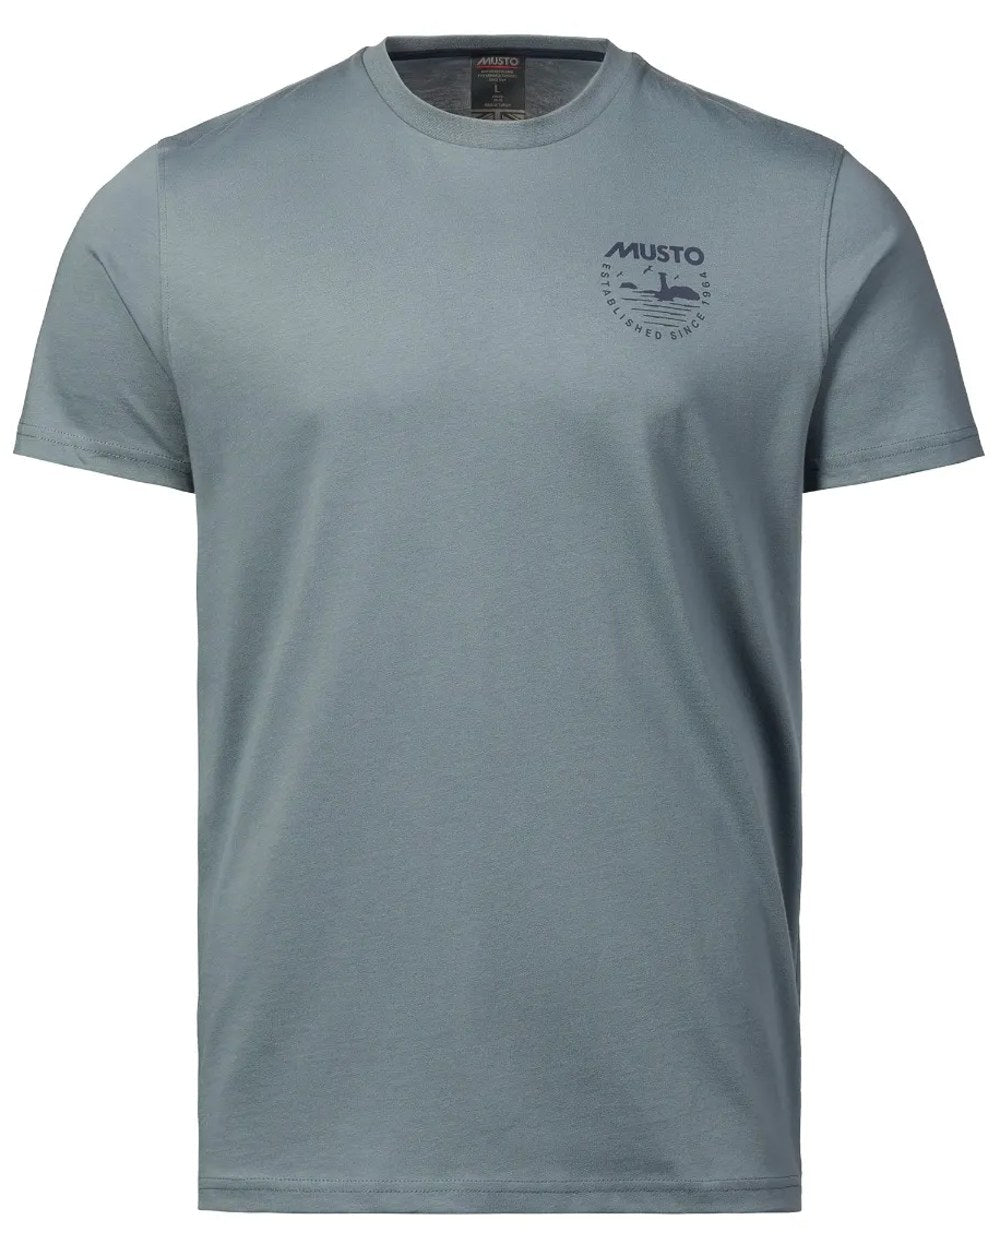 Musto Mens Marina Short Sleeve T-Shirt in Stormy Weather 